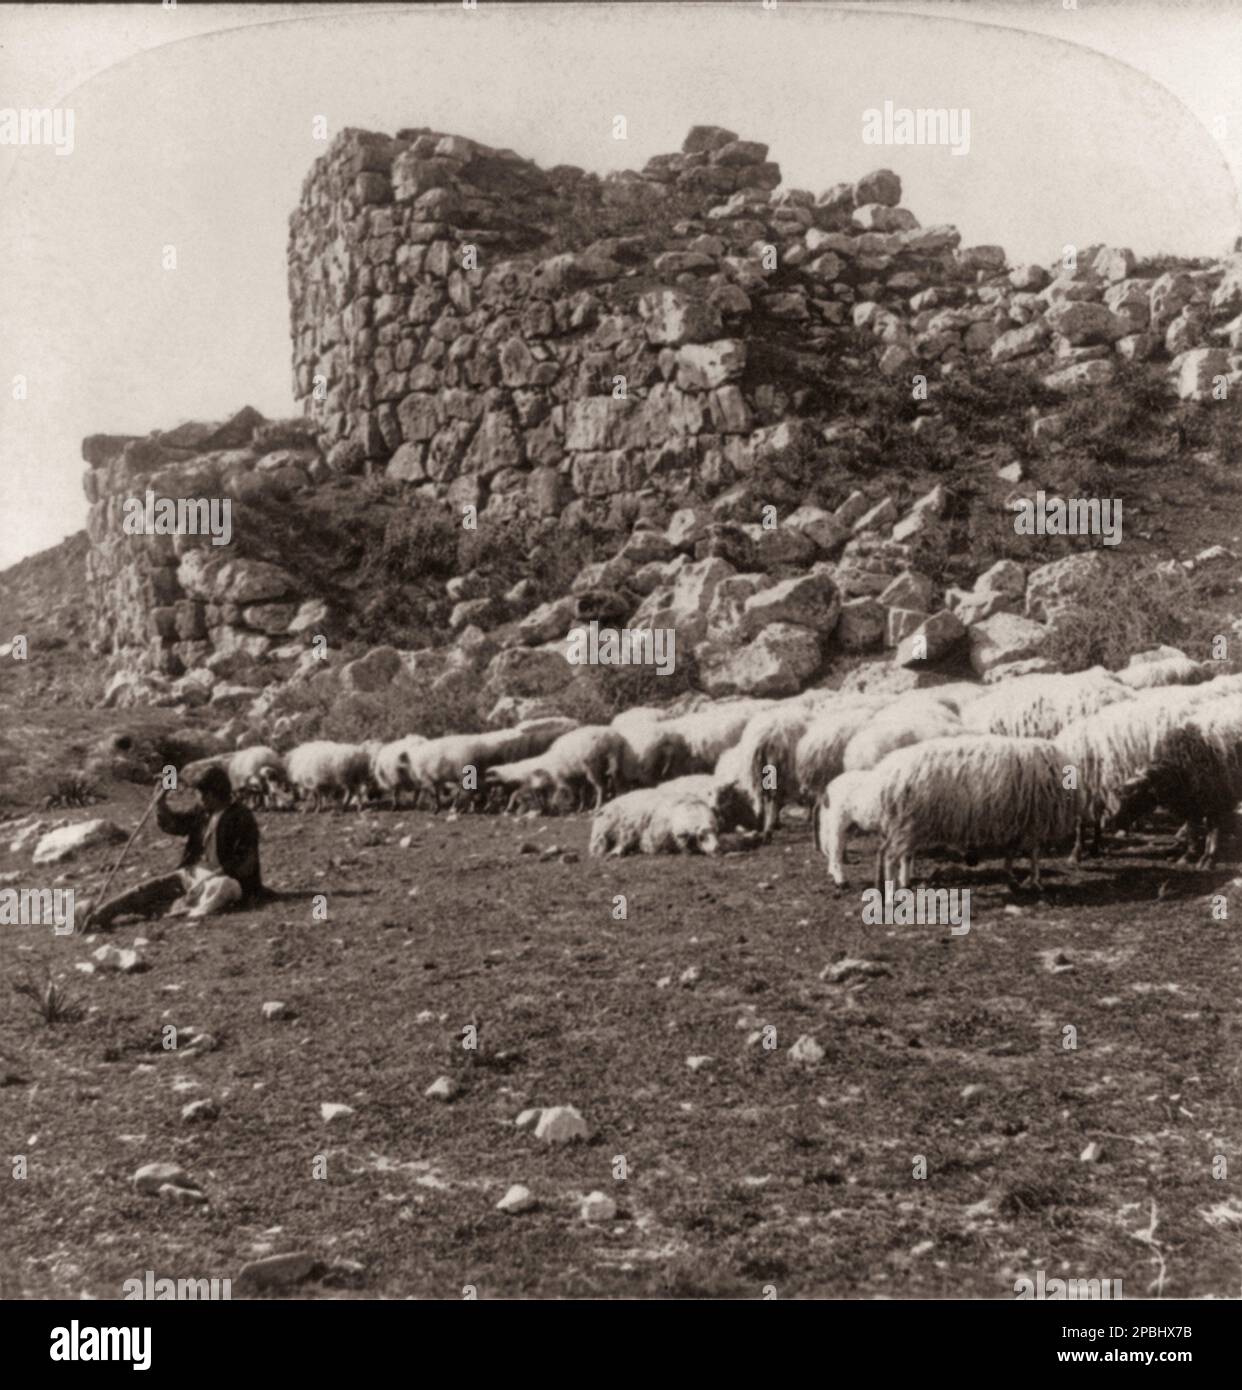 1897 : Great tower of Tiryns, Greece. Birthplace of Hercules . Stereotype photo by Underwood Co., USA . The german archeologist HEINRICH SCHLIEMANN ( 1822 in Neubukow, Mecklenburg-Schwerin -  1890 in Naples , Italy ) was a German treasure hunter, an advocate of the historical reality of places mentioned in the works of Homer, and an important excavator of Troy and of the Mycenaean sites Mycenae and Tiryns . - FOTO STORICHE - HISTORY - pastore - pecore al pascolo - Shepherd with flock of sheep - OMERO - TROIA - MICENE - GEOGRAFIA - GEOGRAPHY  - ARCHITETTURA - ARCHITECTURE - ARCHEOLOGIA - ARCHEO Stock Photo